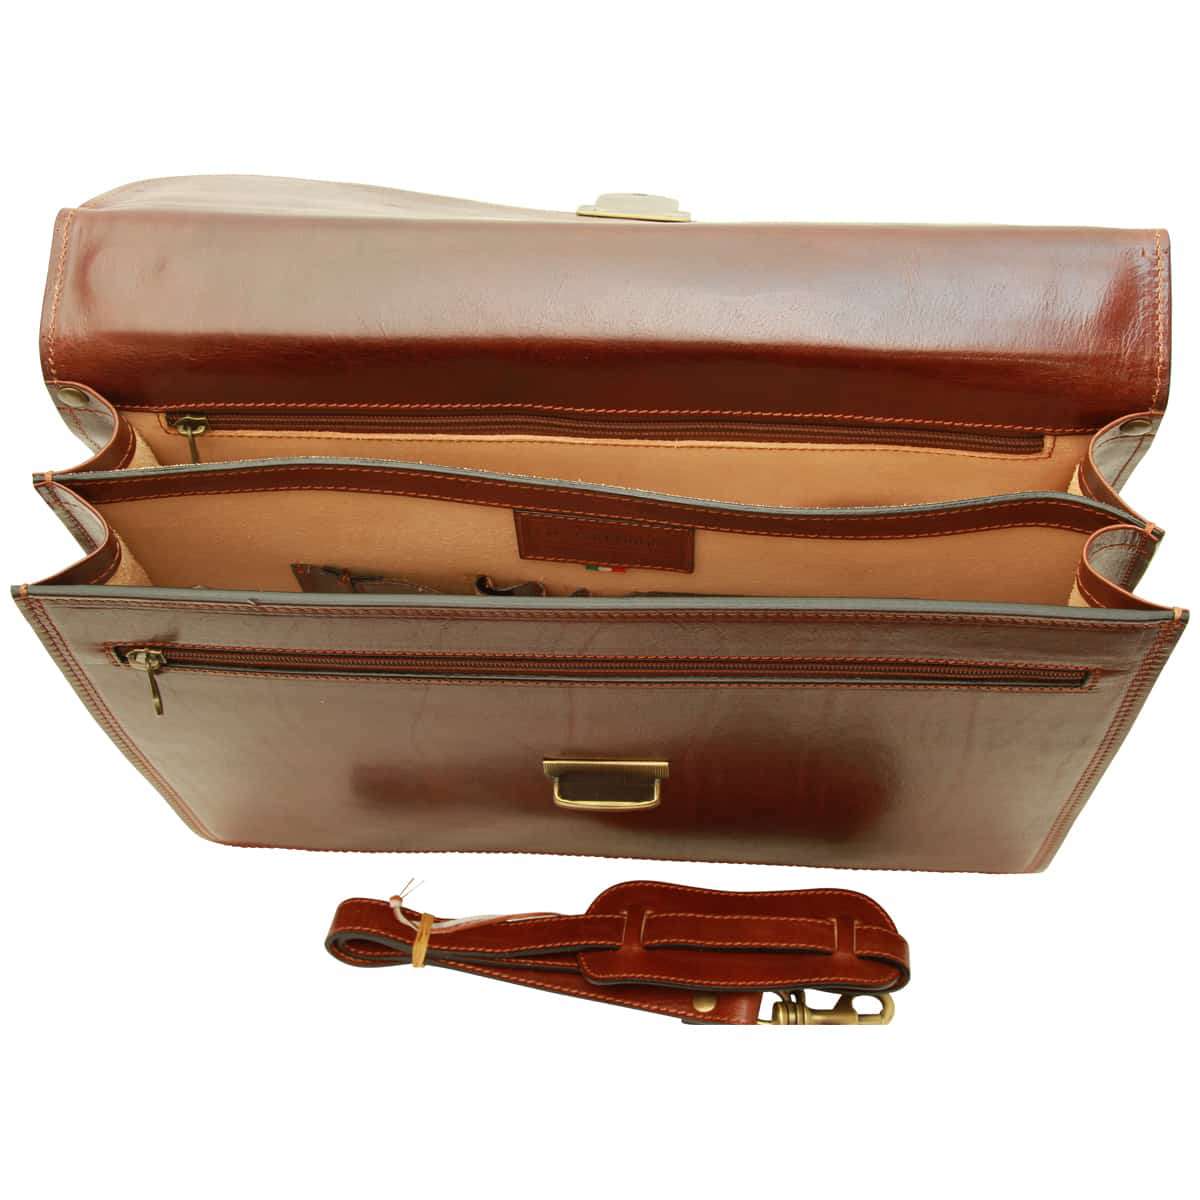 Vachetta Leather Briefcase - Brown | 200105MA US | Old Angler Firenze